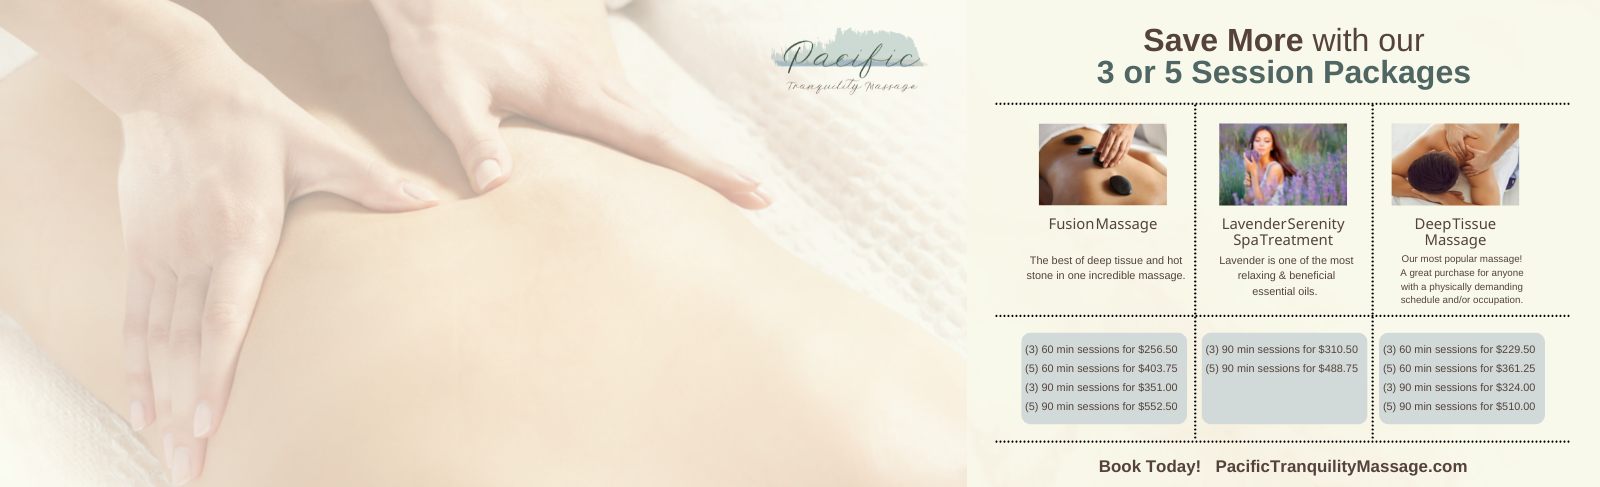 Our spa packages offer 10% off for 3 sessions or 15% off for 5 sessions